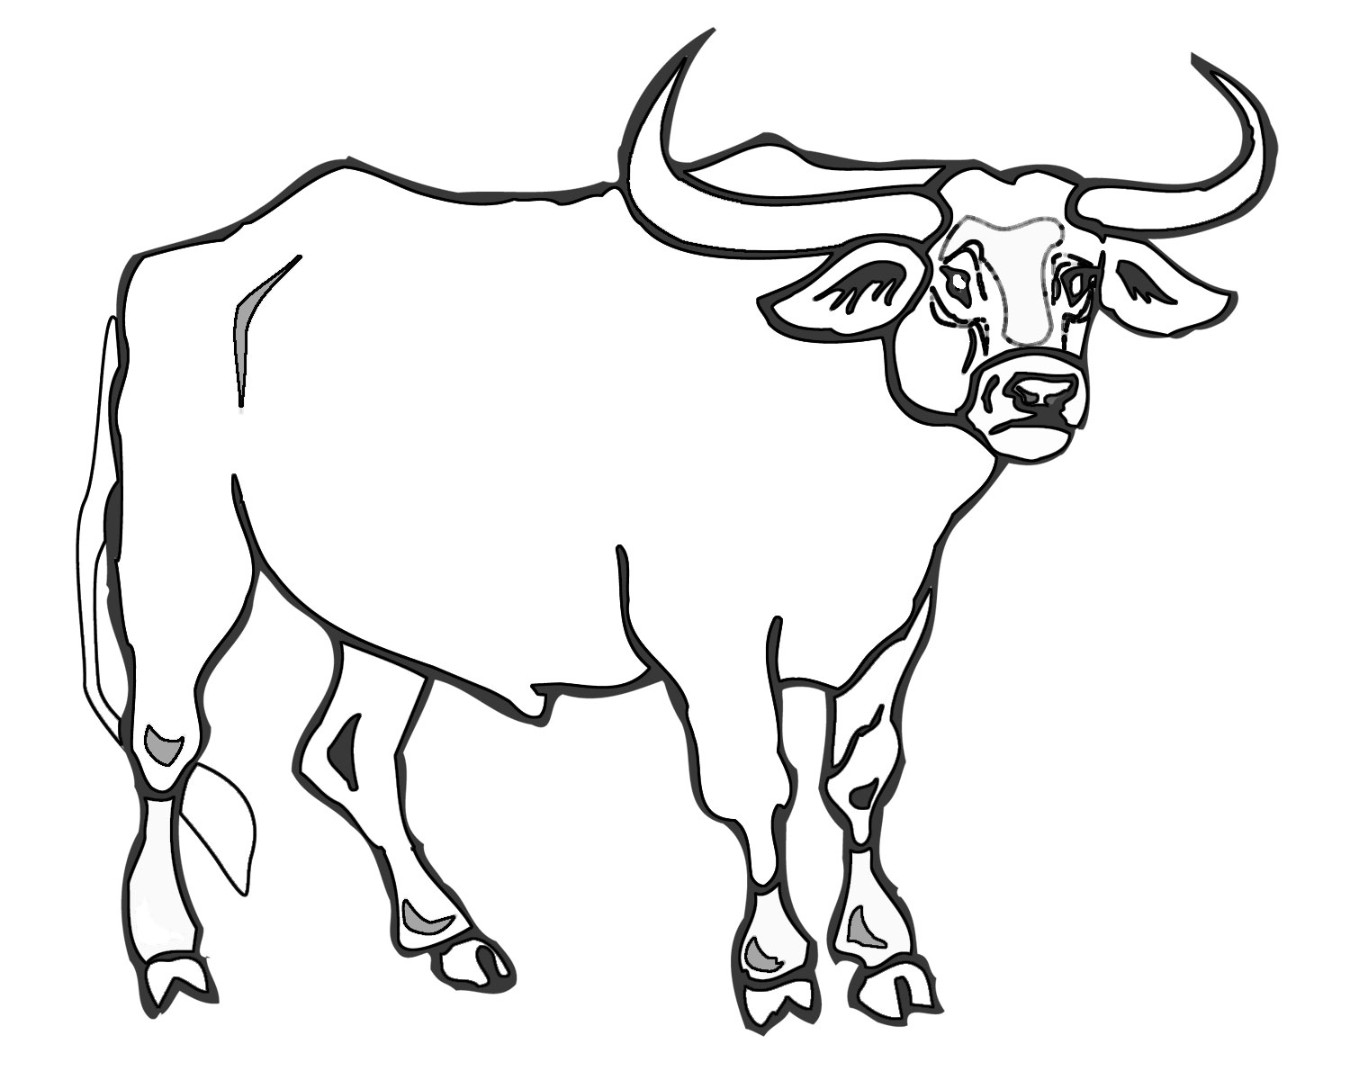 Bull coloring pages to download and print for free